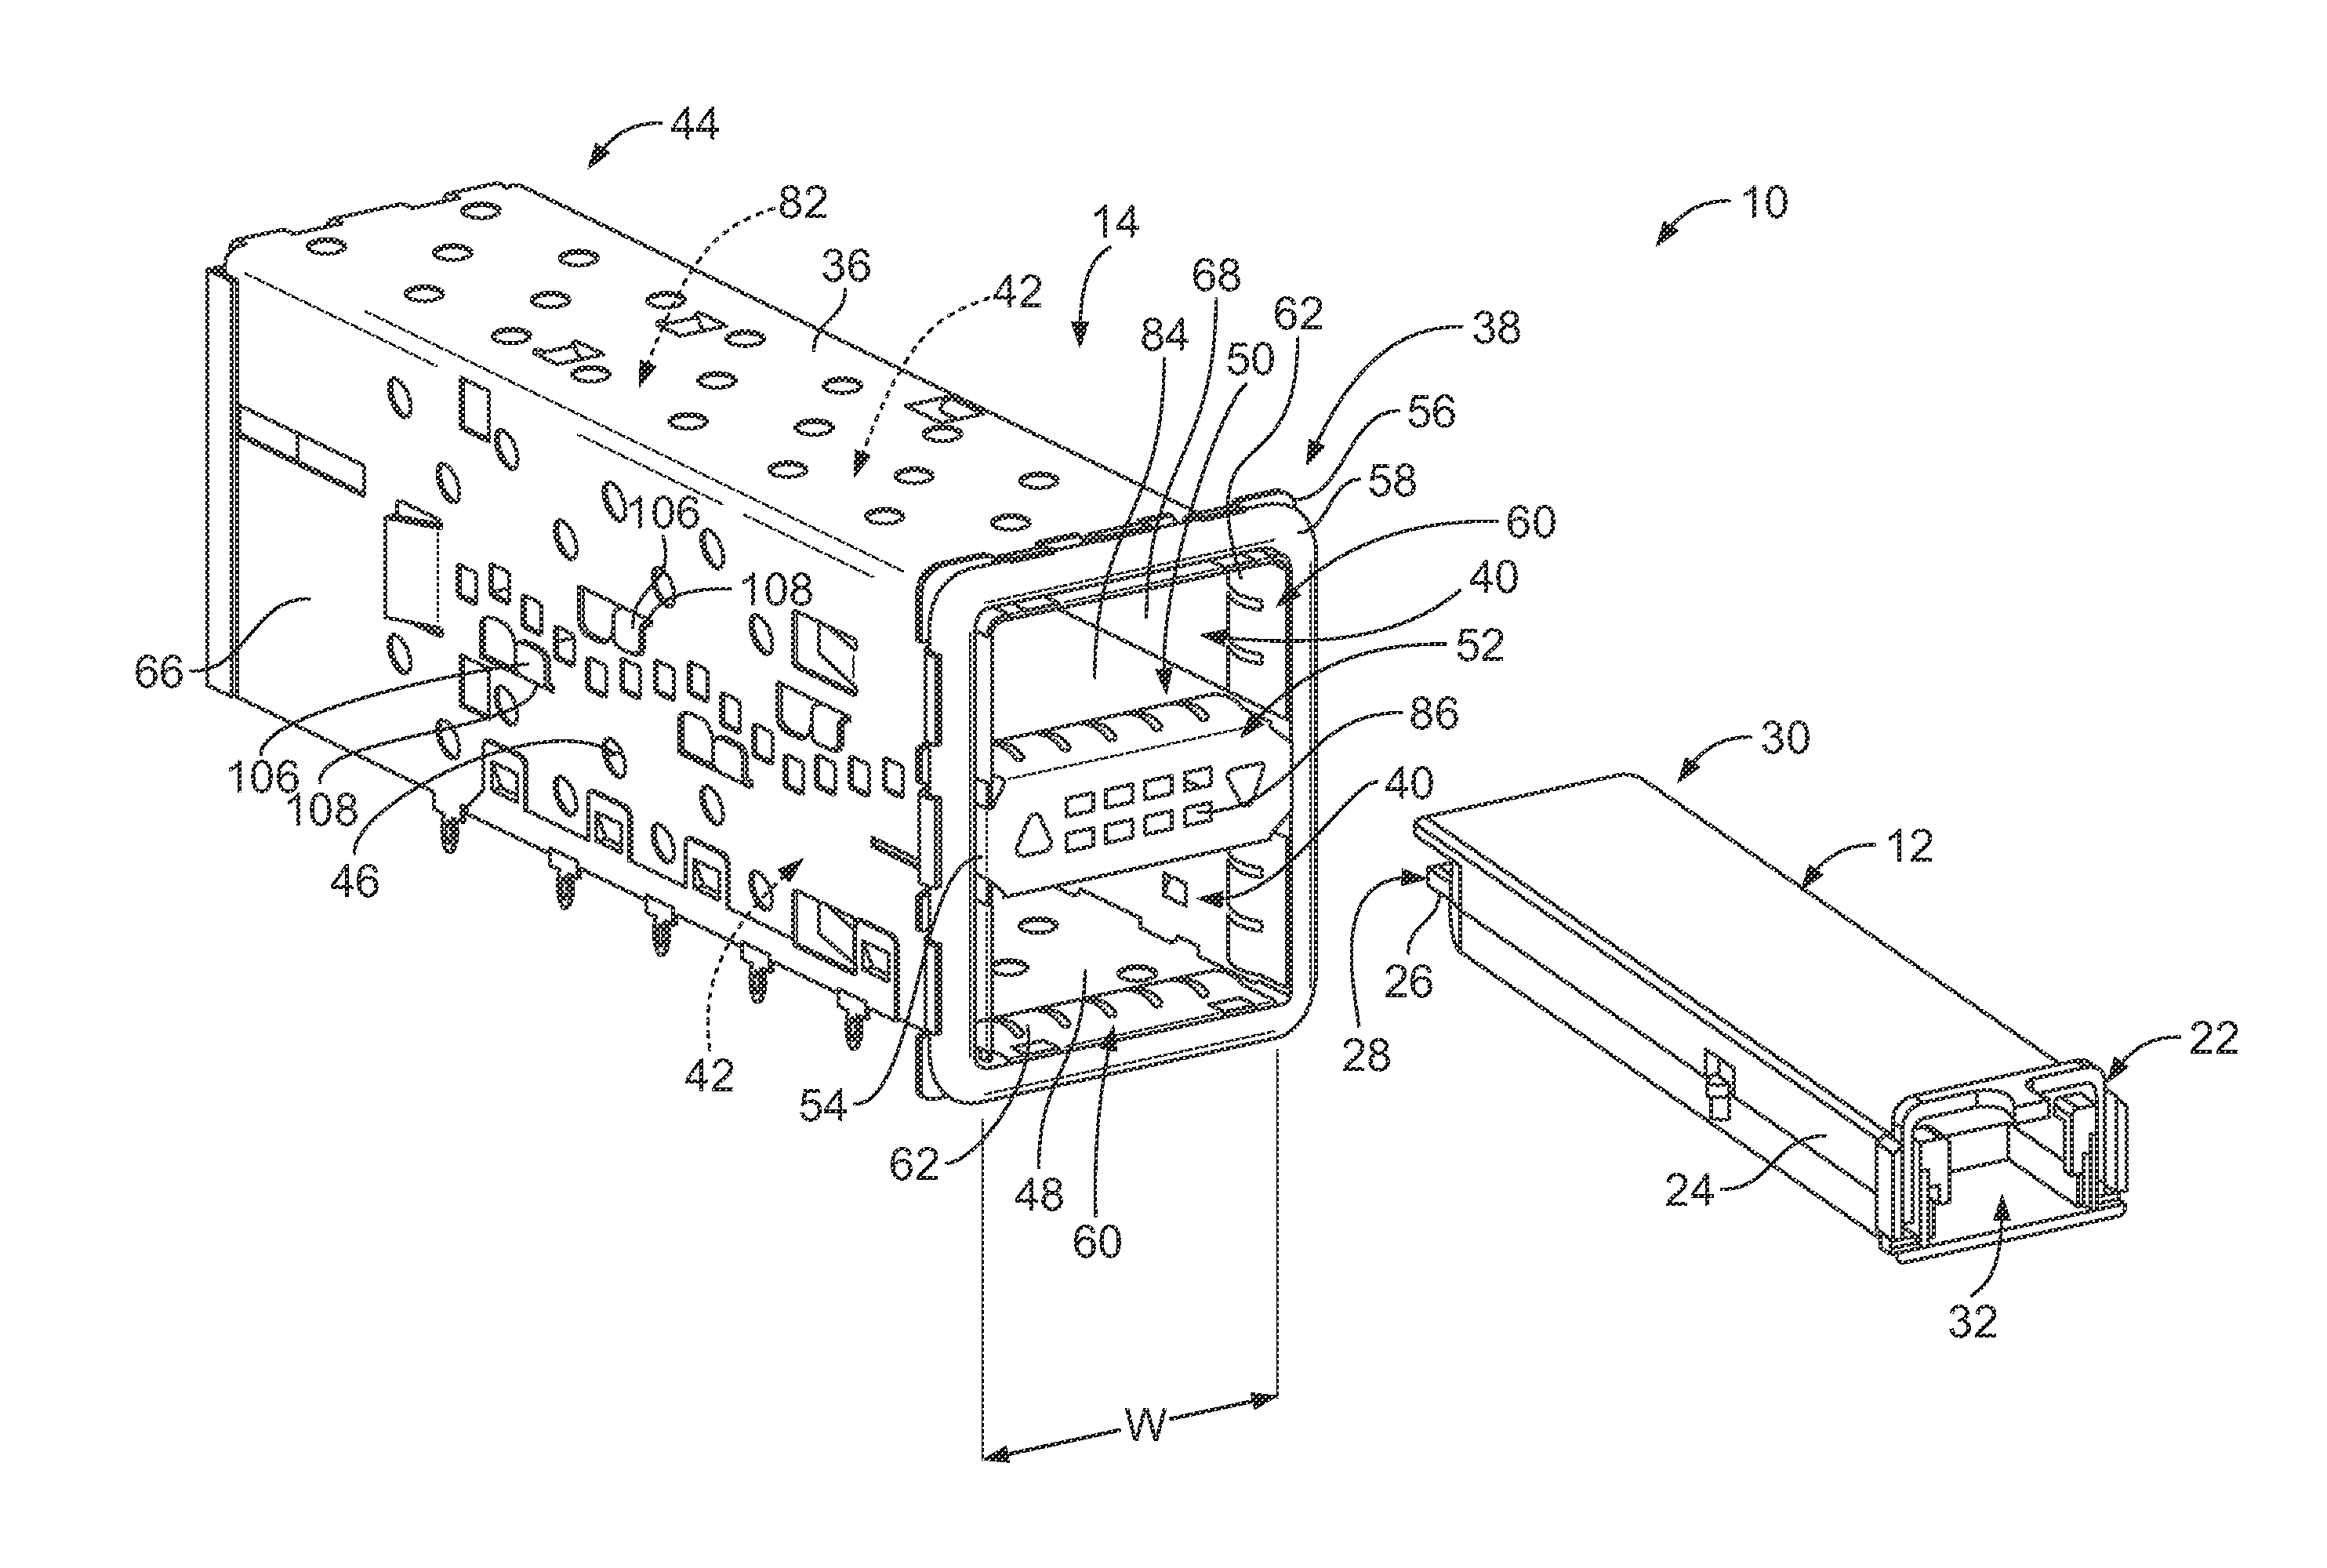 Electrical connector assembly with EMI cover